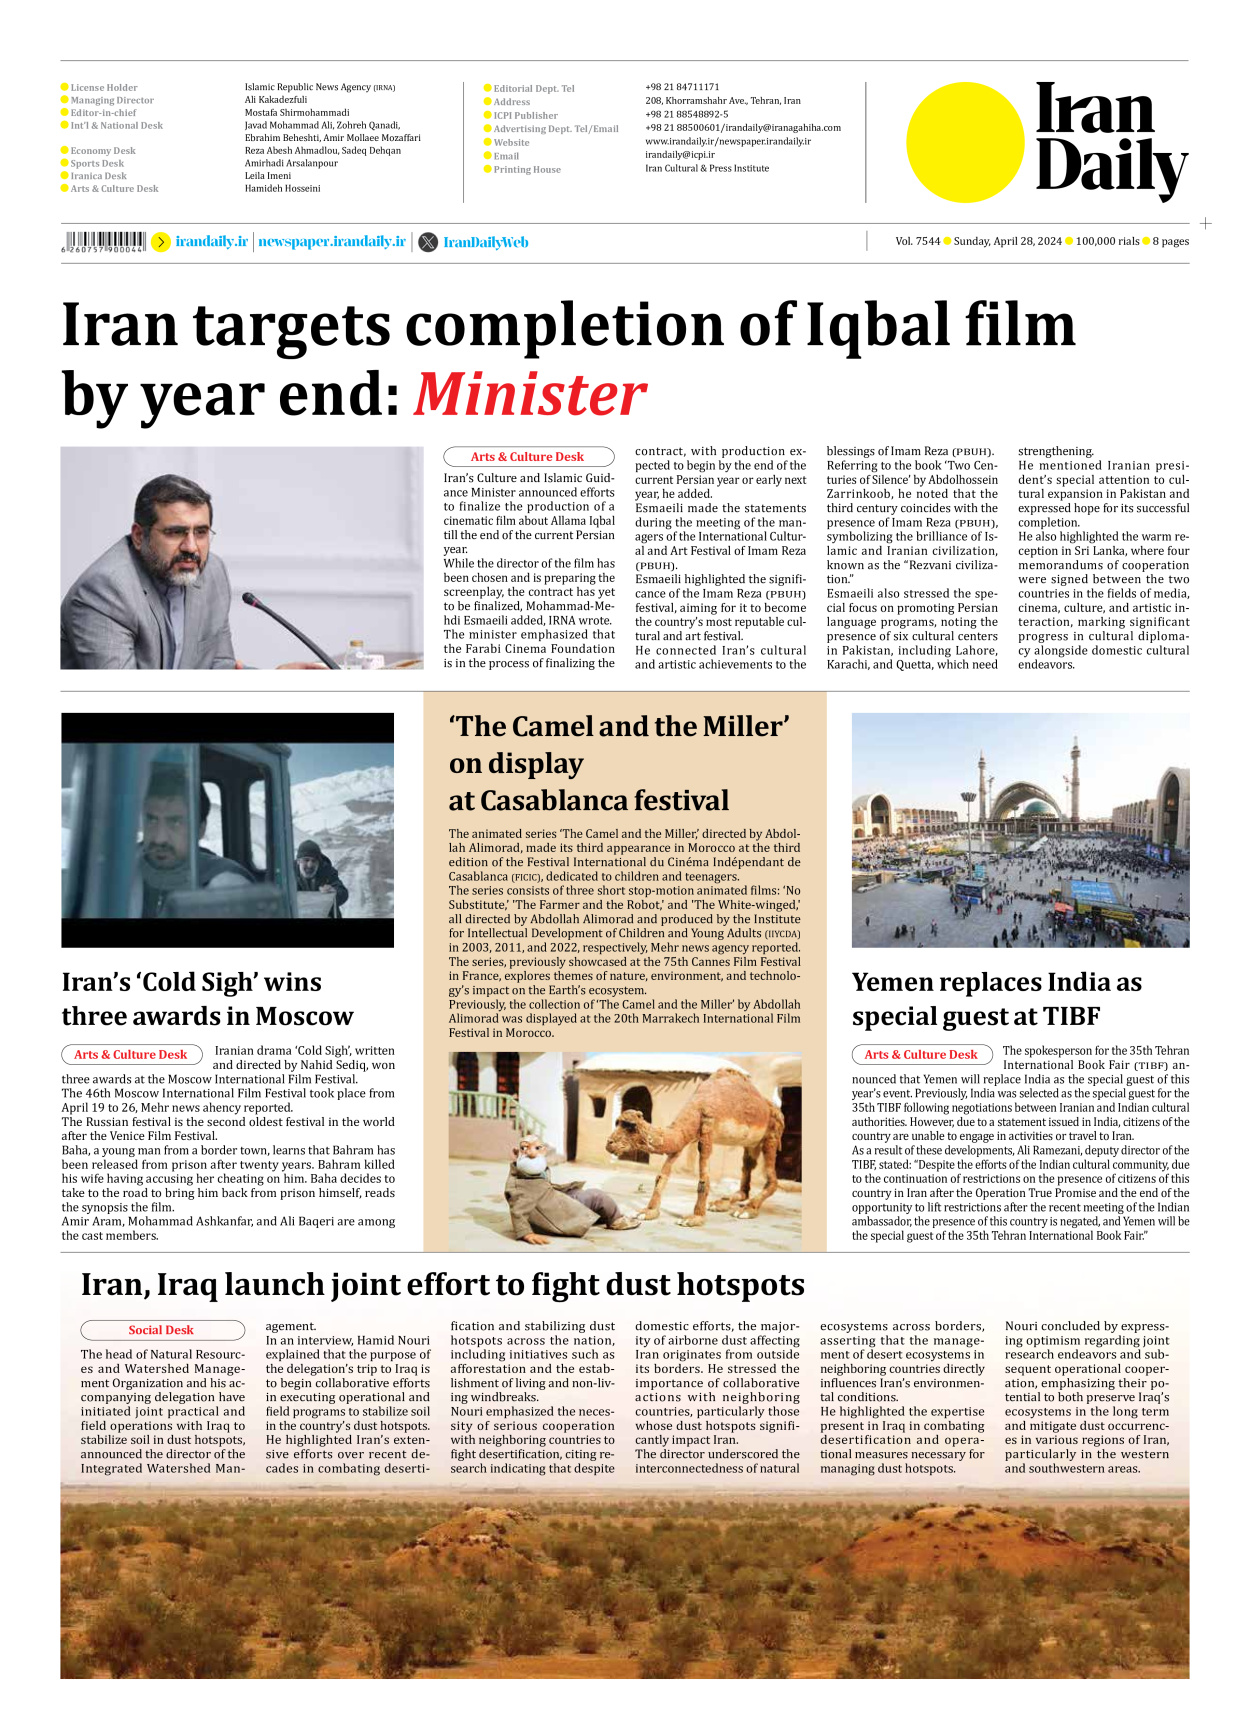 Iran Daily - Number Seven Thousand Five Hundred and Forty Four - 28 April 2024 - Page 8